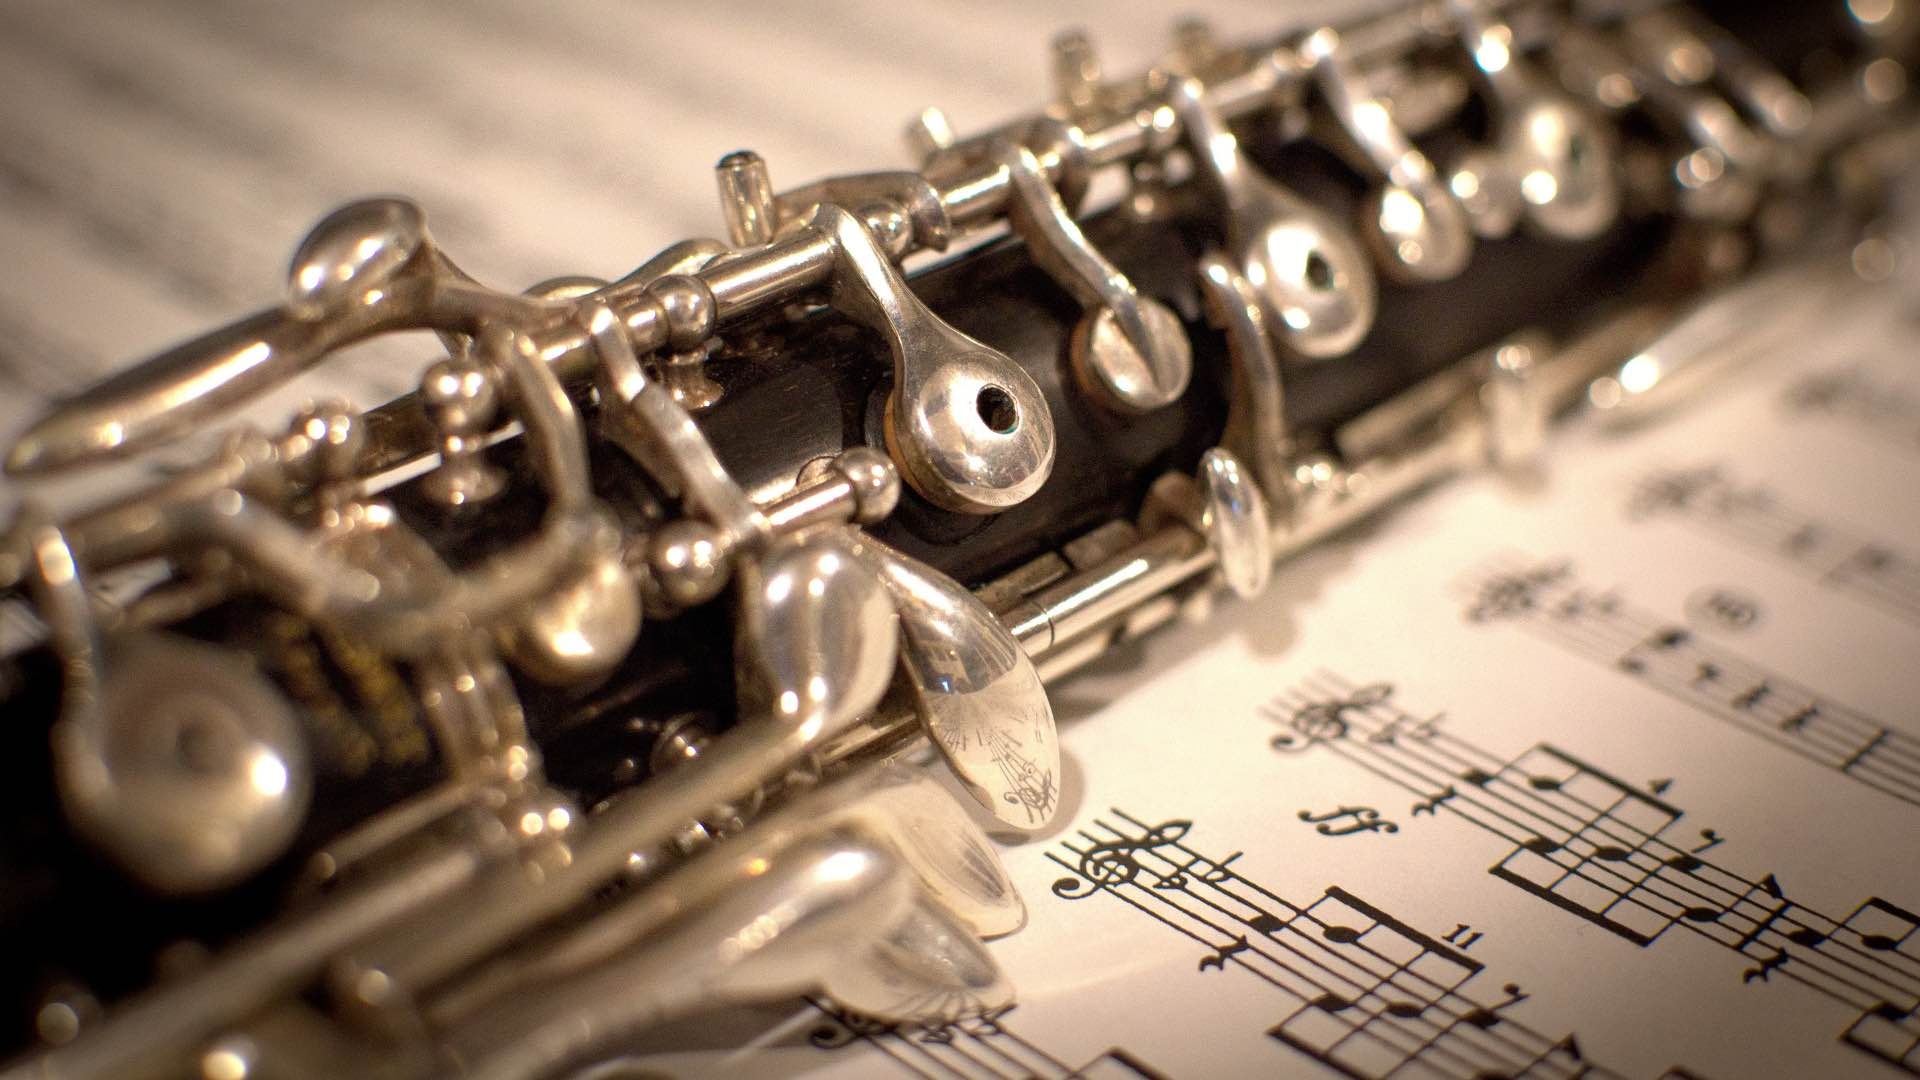 Oboe: A woodwind instrument having a slender conical tubular body and a double-reed mouthpiece. 1920x1080 Full HD Background.